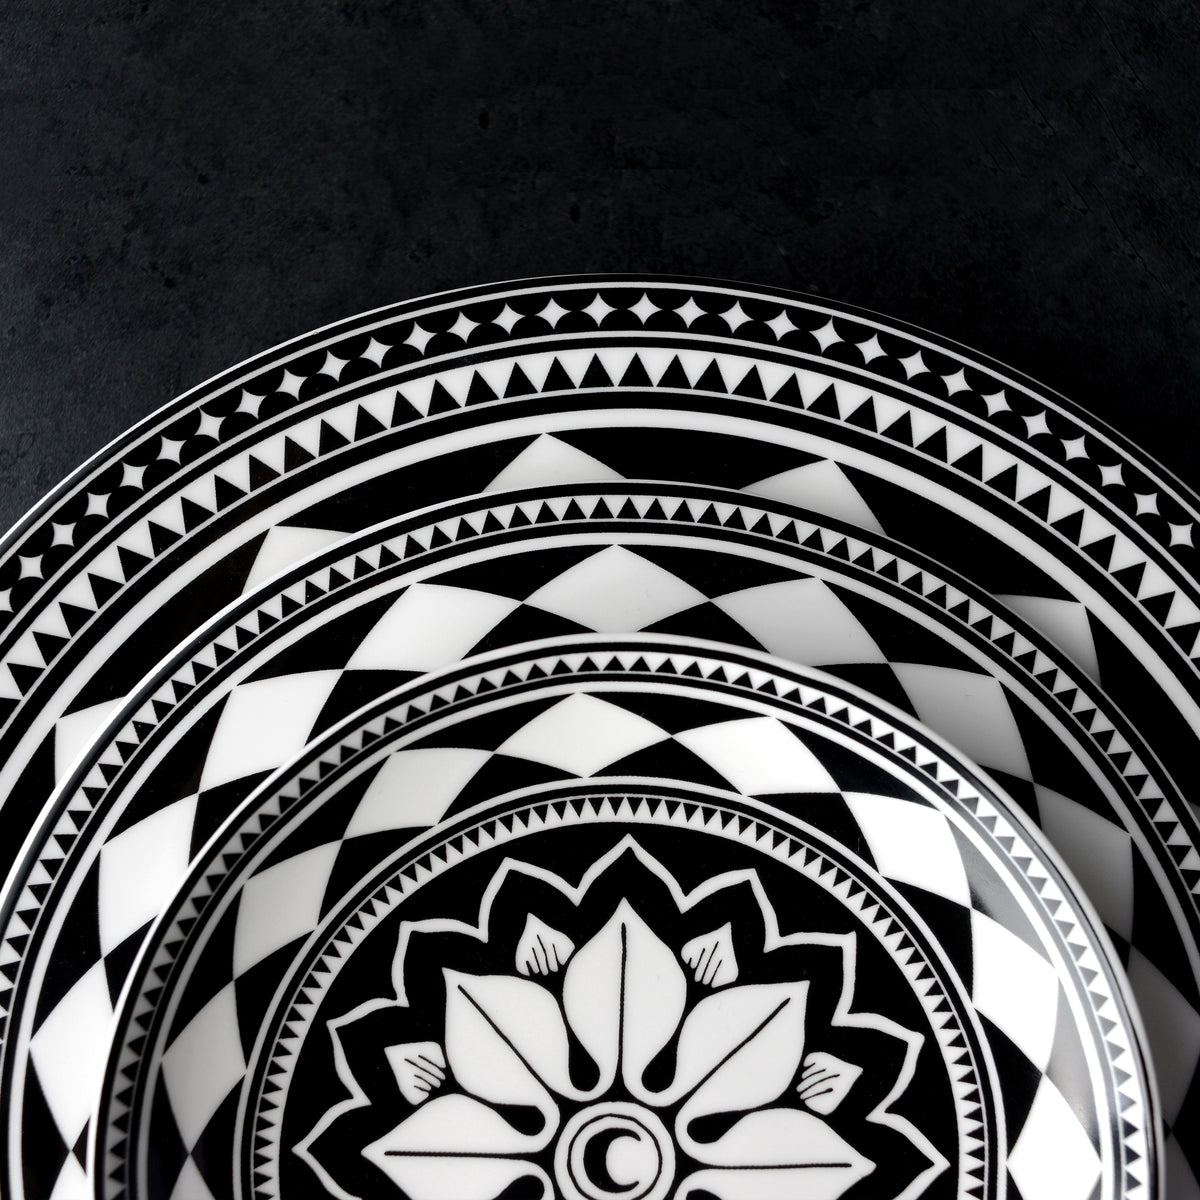 A sophisticated Fez Rimmed Dinner Plate by Caskata Artisanal Home featuring nested black and white plates adorned with intricate geometric and floral Moroccan patterns against a dark background.